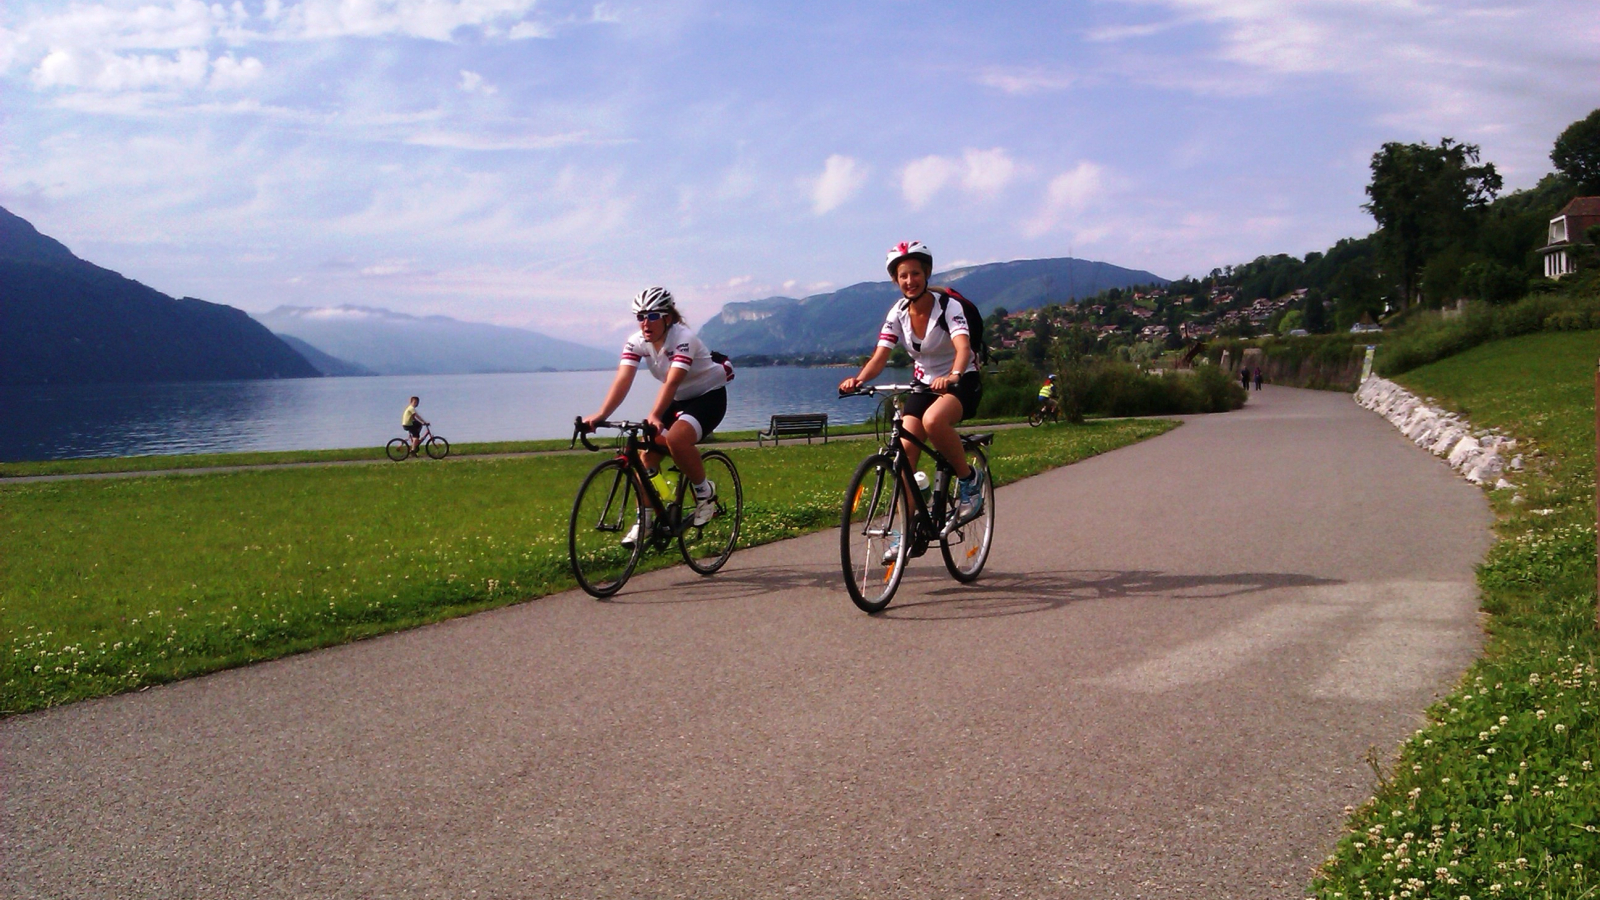 Cycling along the Lake in Aix-les-Bains